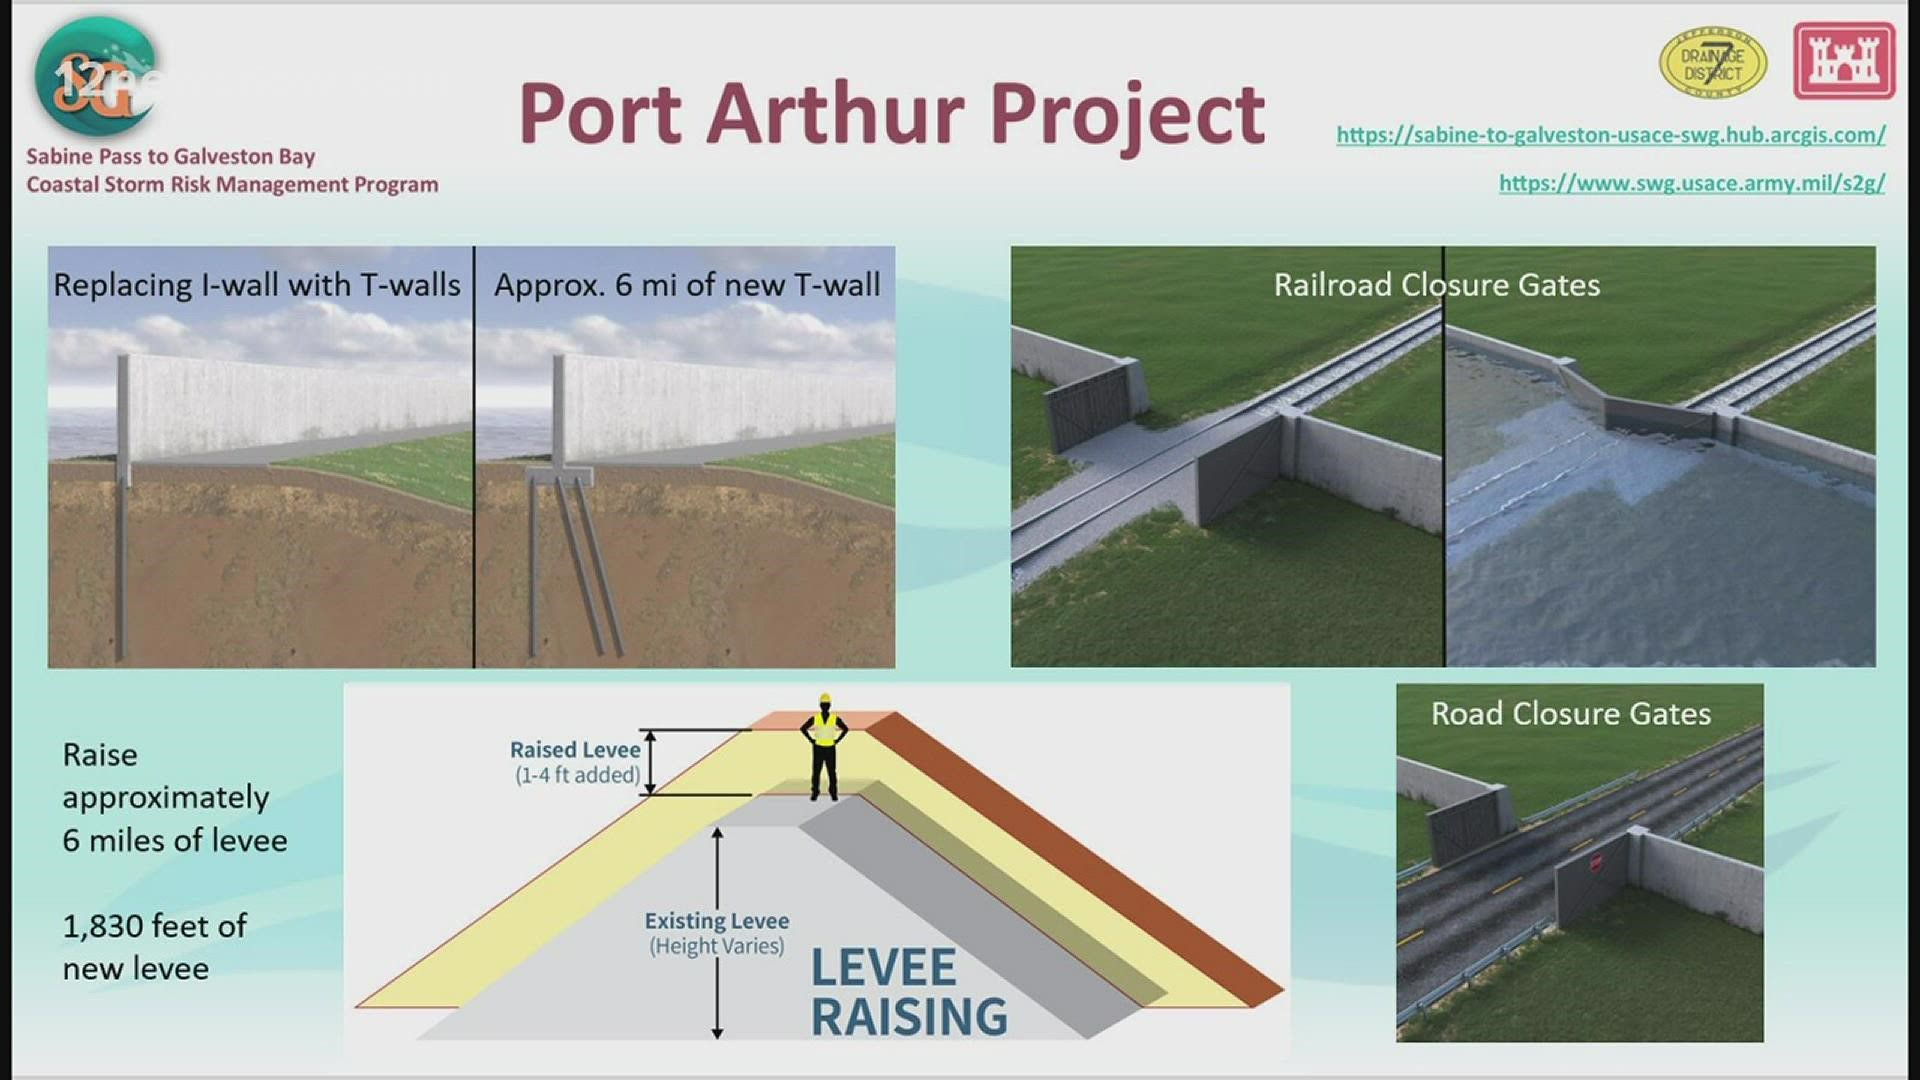 This project is split into three parts targeting three vulnerable areas: Parts of Port Arthur, Orange County, and the Freeport area.